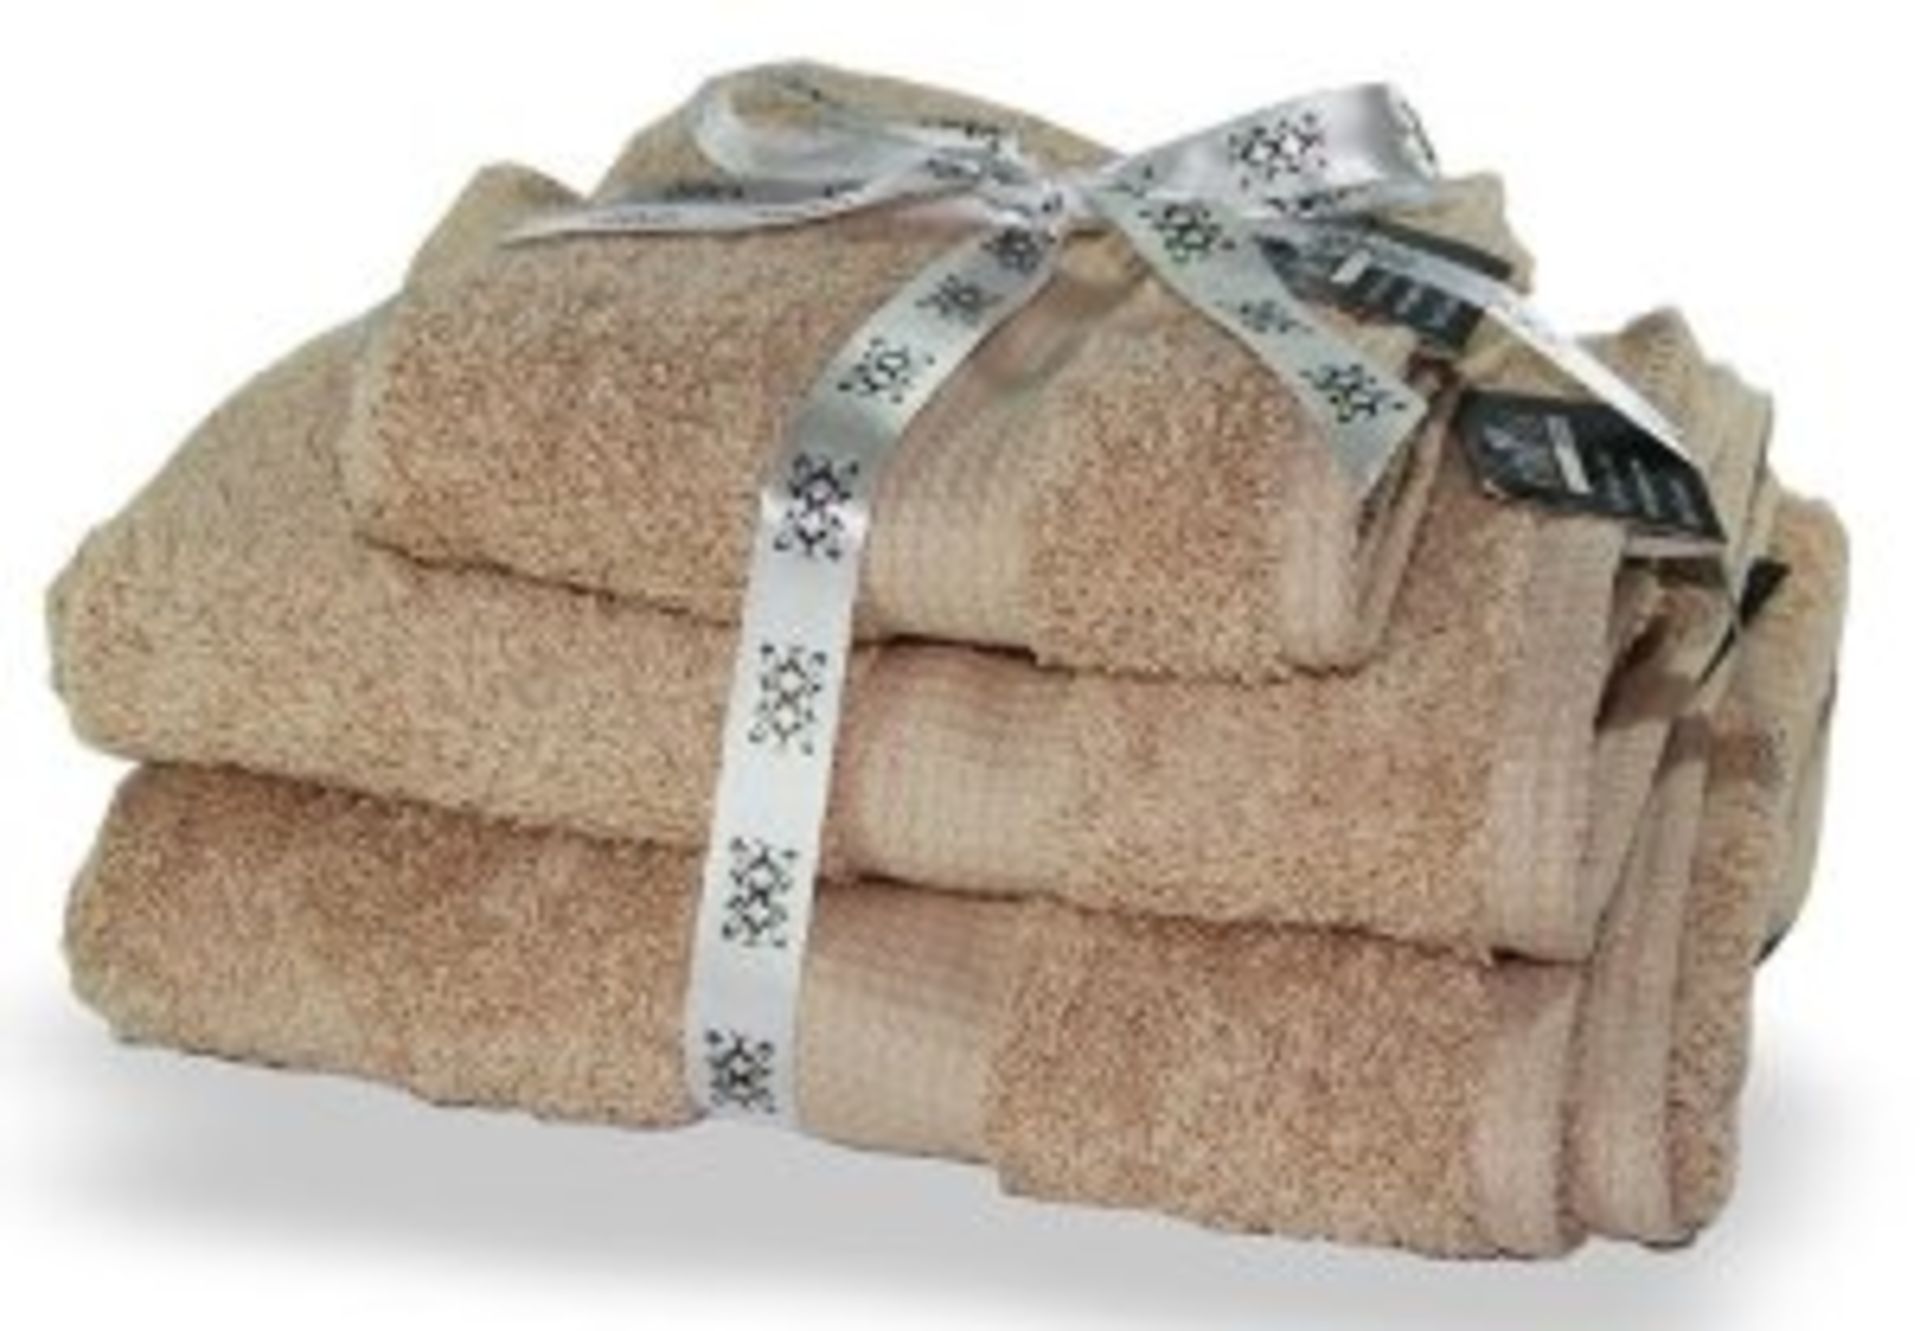 V *TRADE QTY* Brand New Six Piece Latte Towel Bale X 4 Bid price to be multiplied by Four